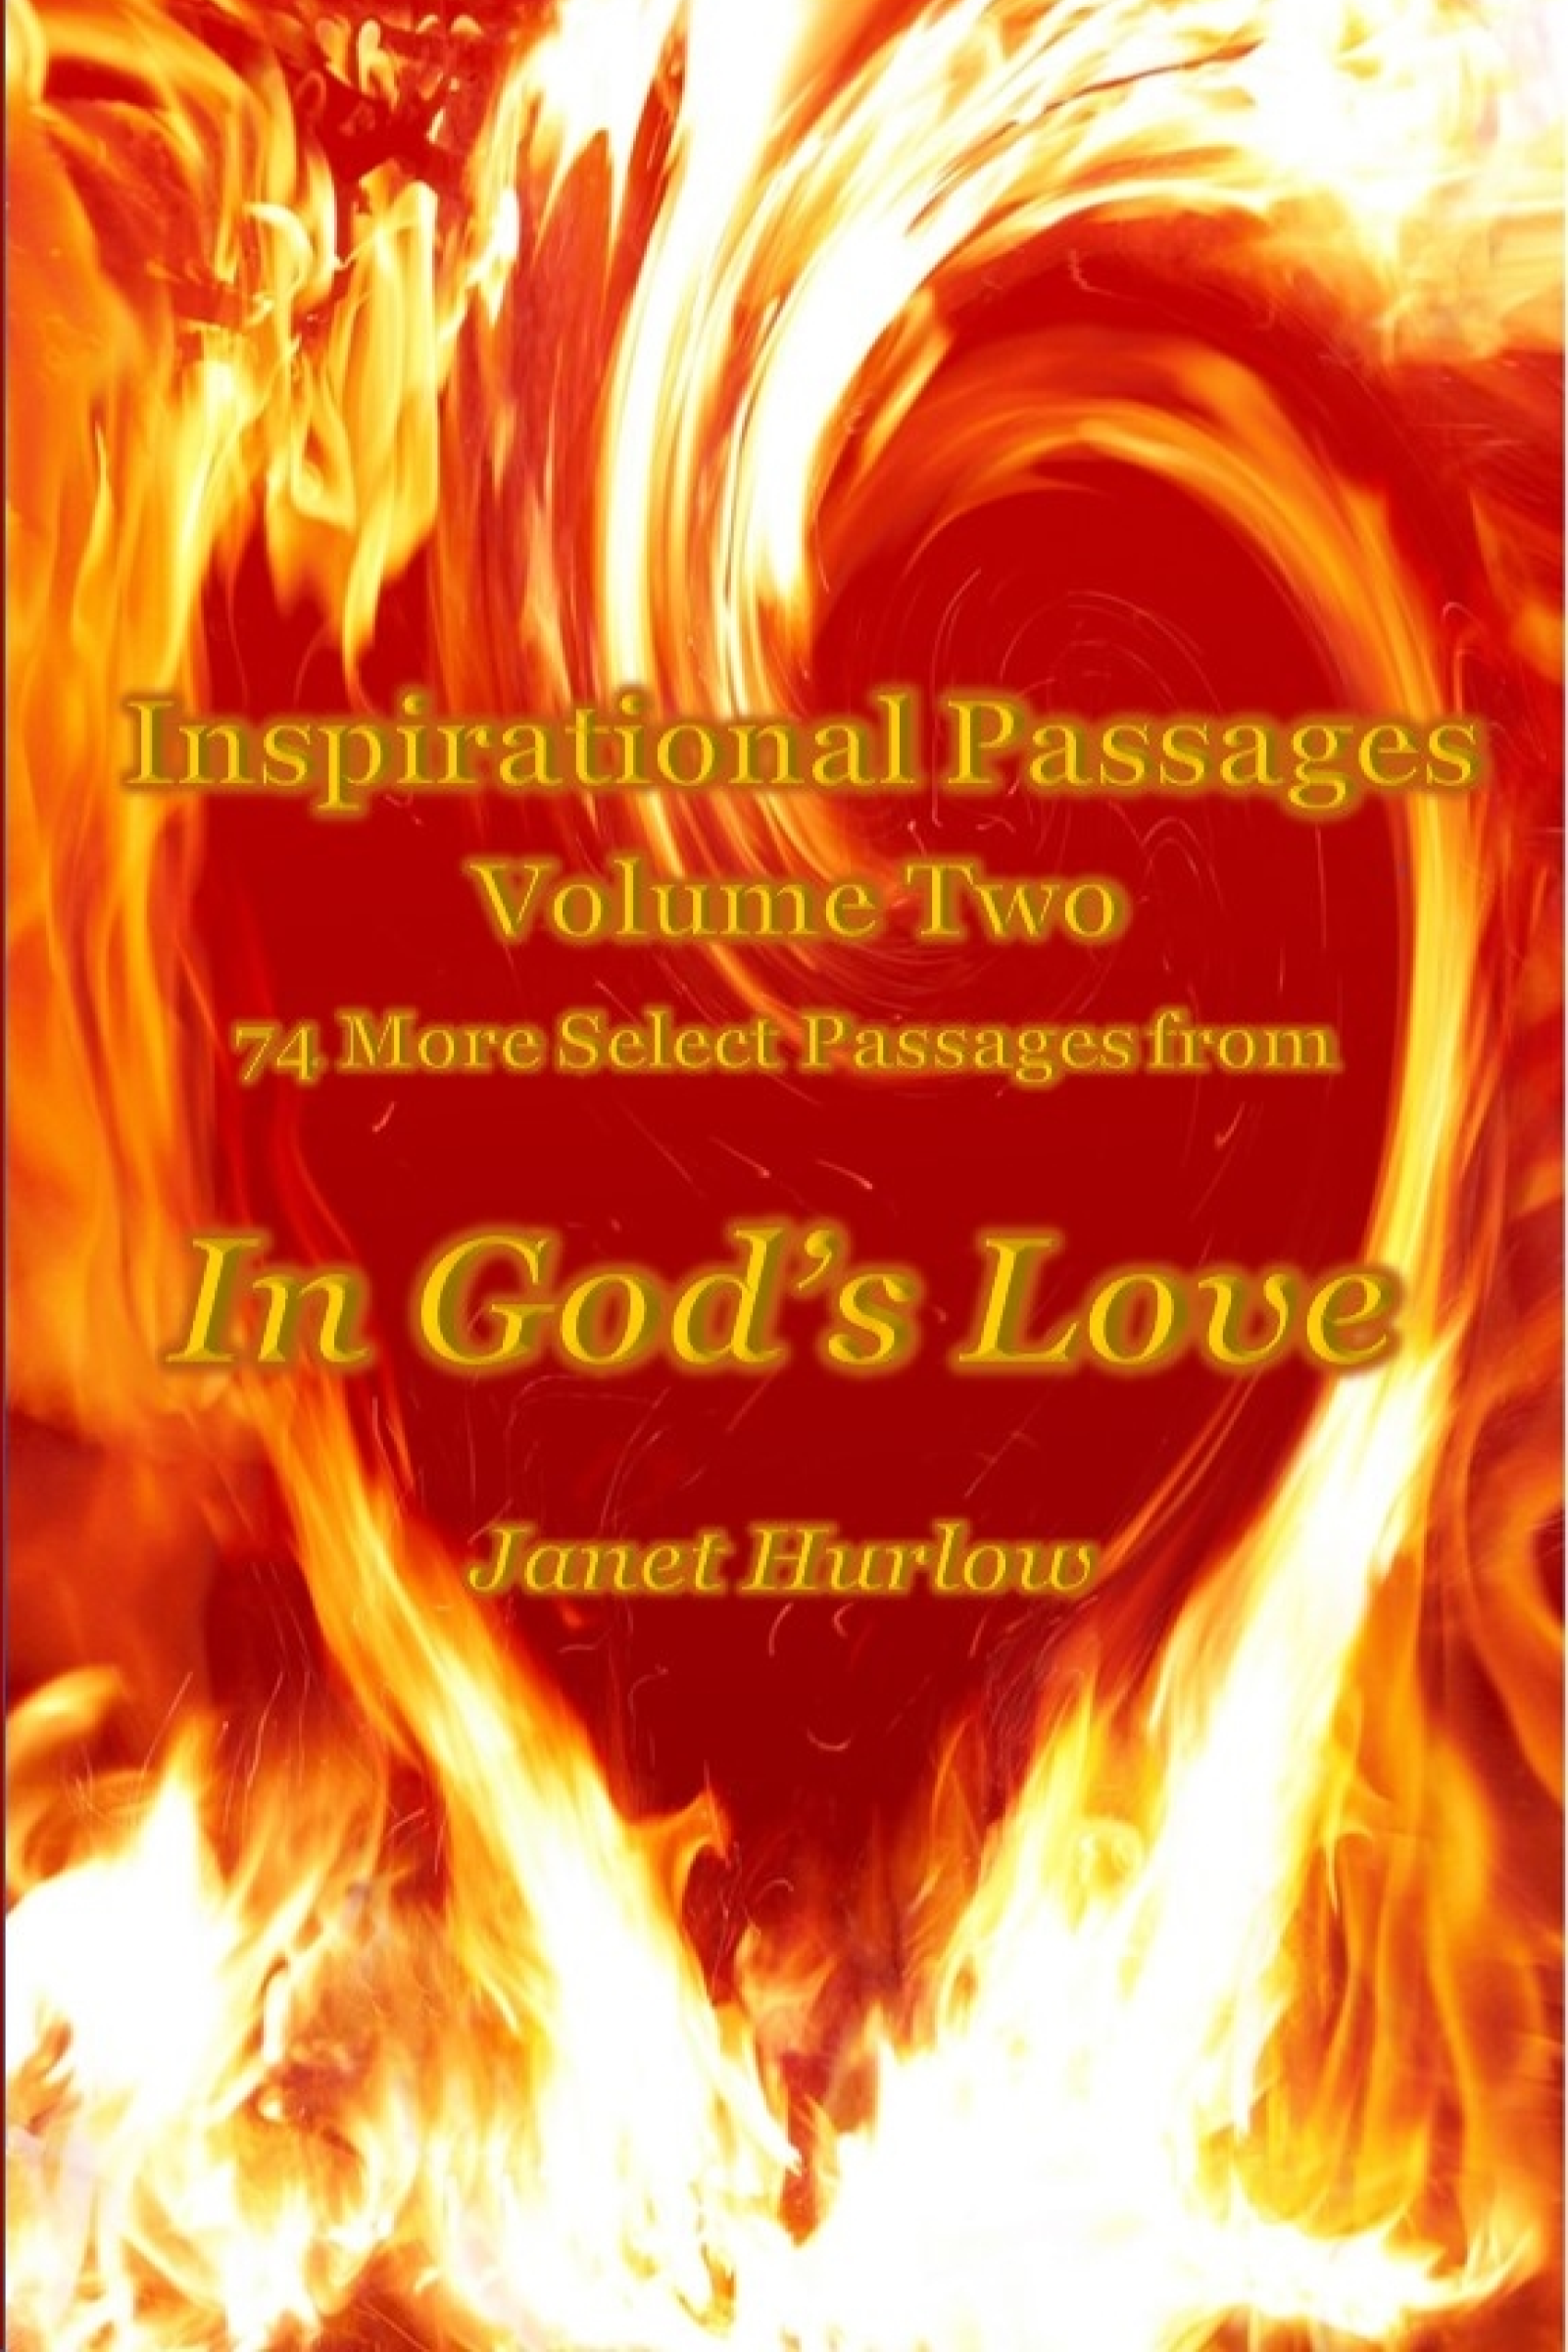 front book cover title Inspirational Passages Volume Two 74 More Select Passages from In God's Love by Janet Hurlow image re flaming heart abstract